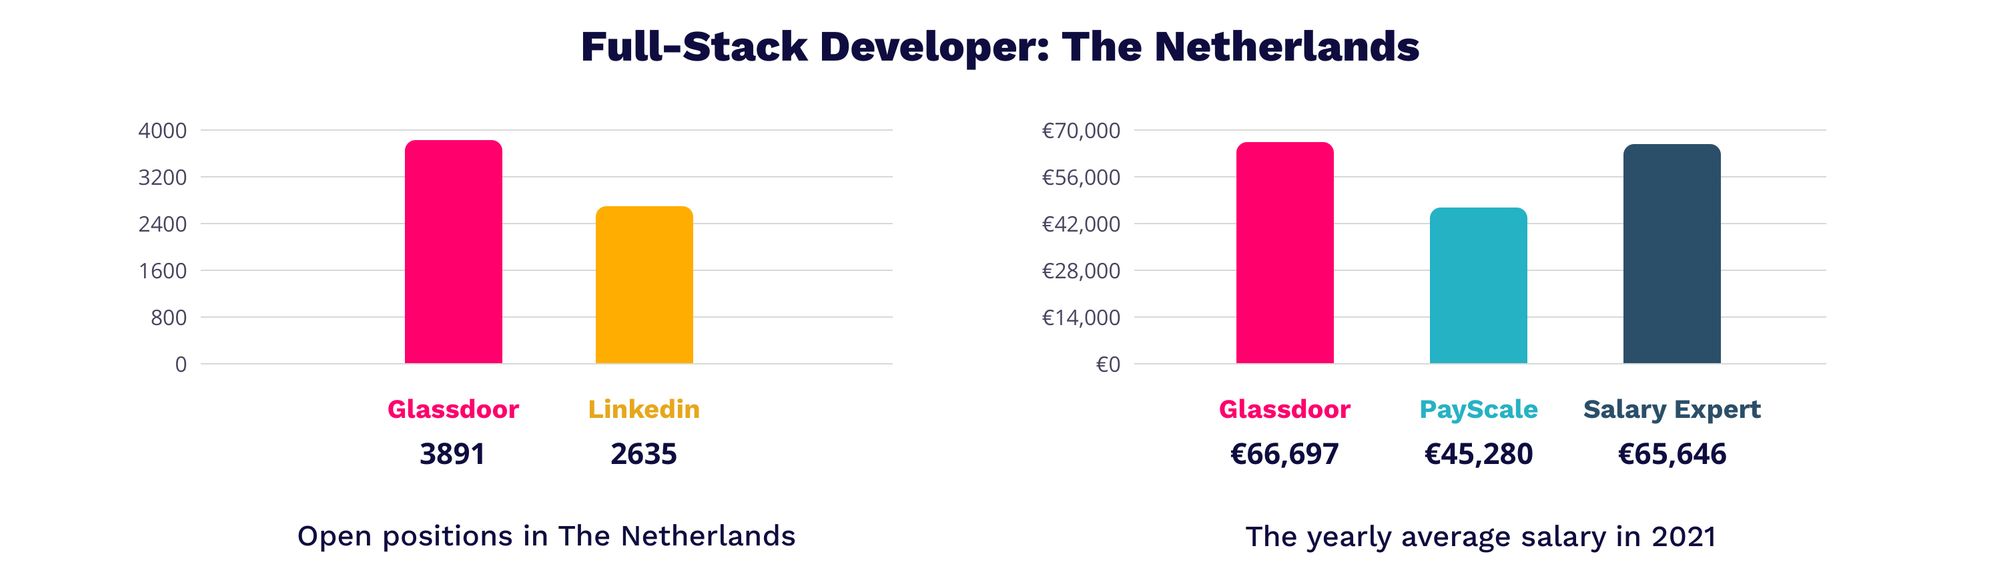 Full-stack developer salary - IT Jobs in The Netherlands | MagicHire.co